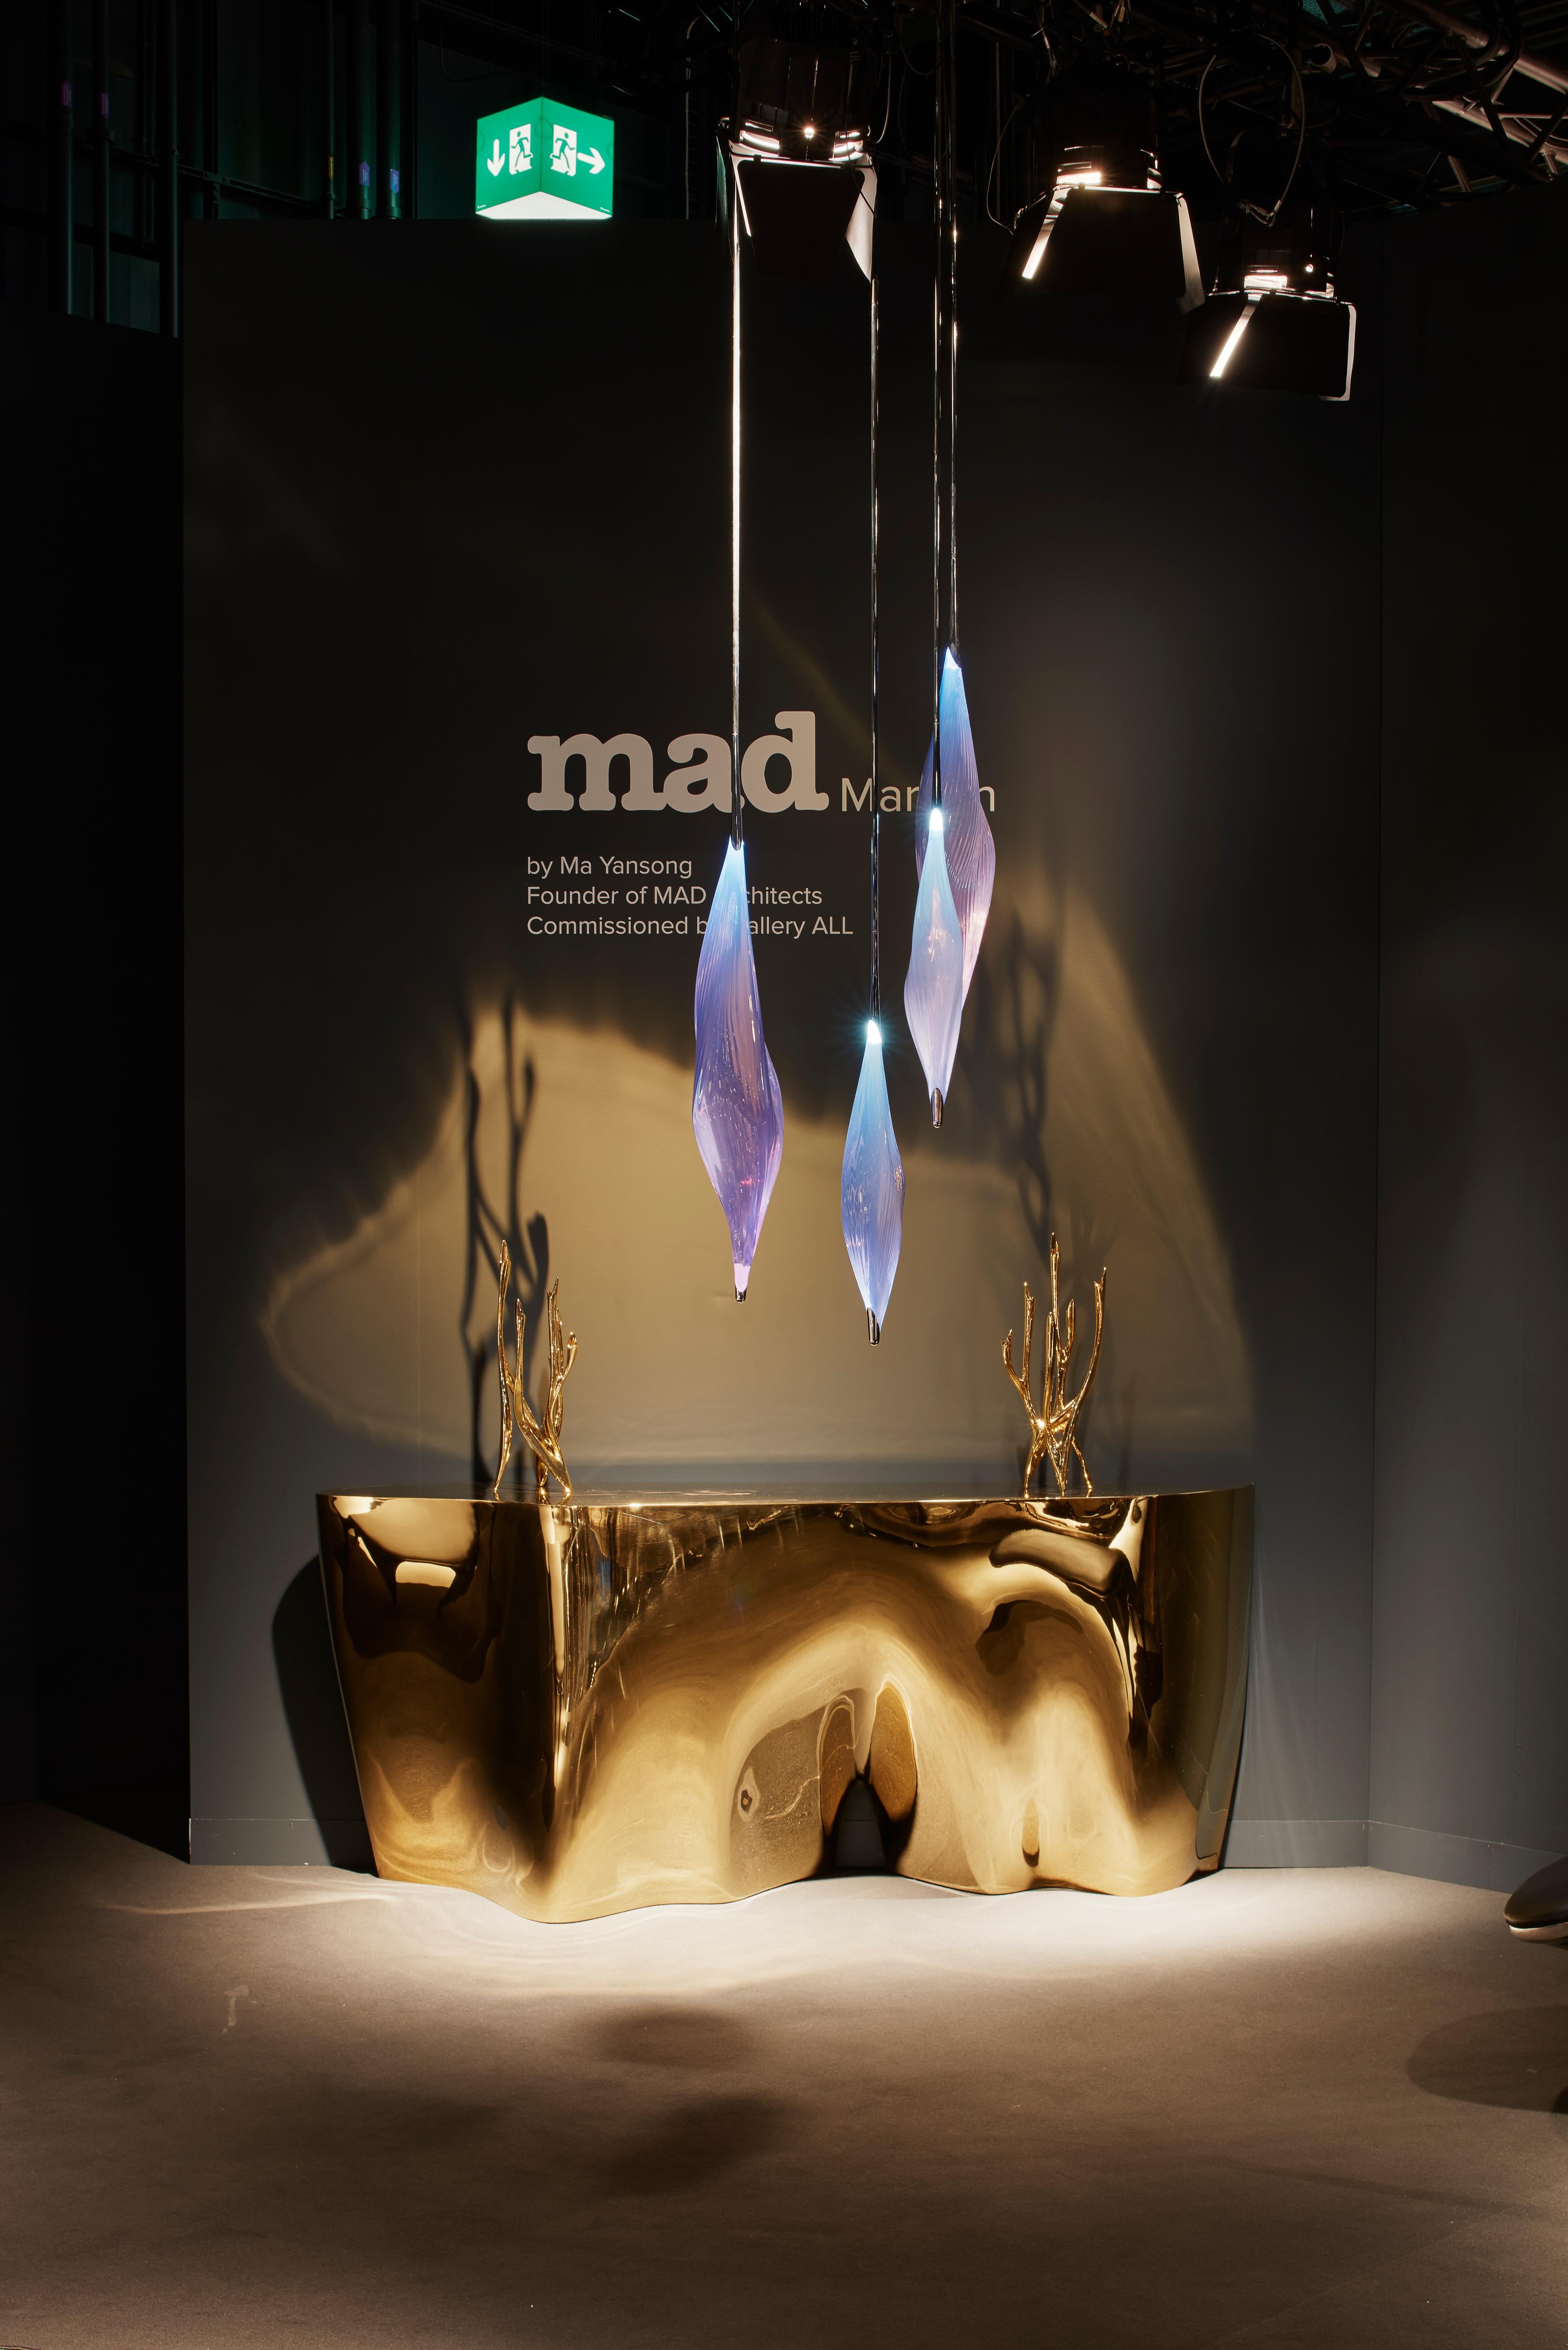 MAD Architects have reinvigorated this favourite of mid-20th century design, the floor-ceiling suspension light. The drooping ridged surface of the PU and stainless steel shade conveys an alien Chrysalis, protecting a creature in a state of